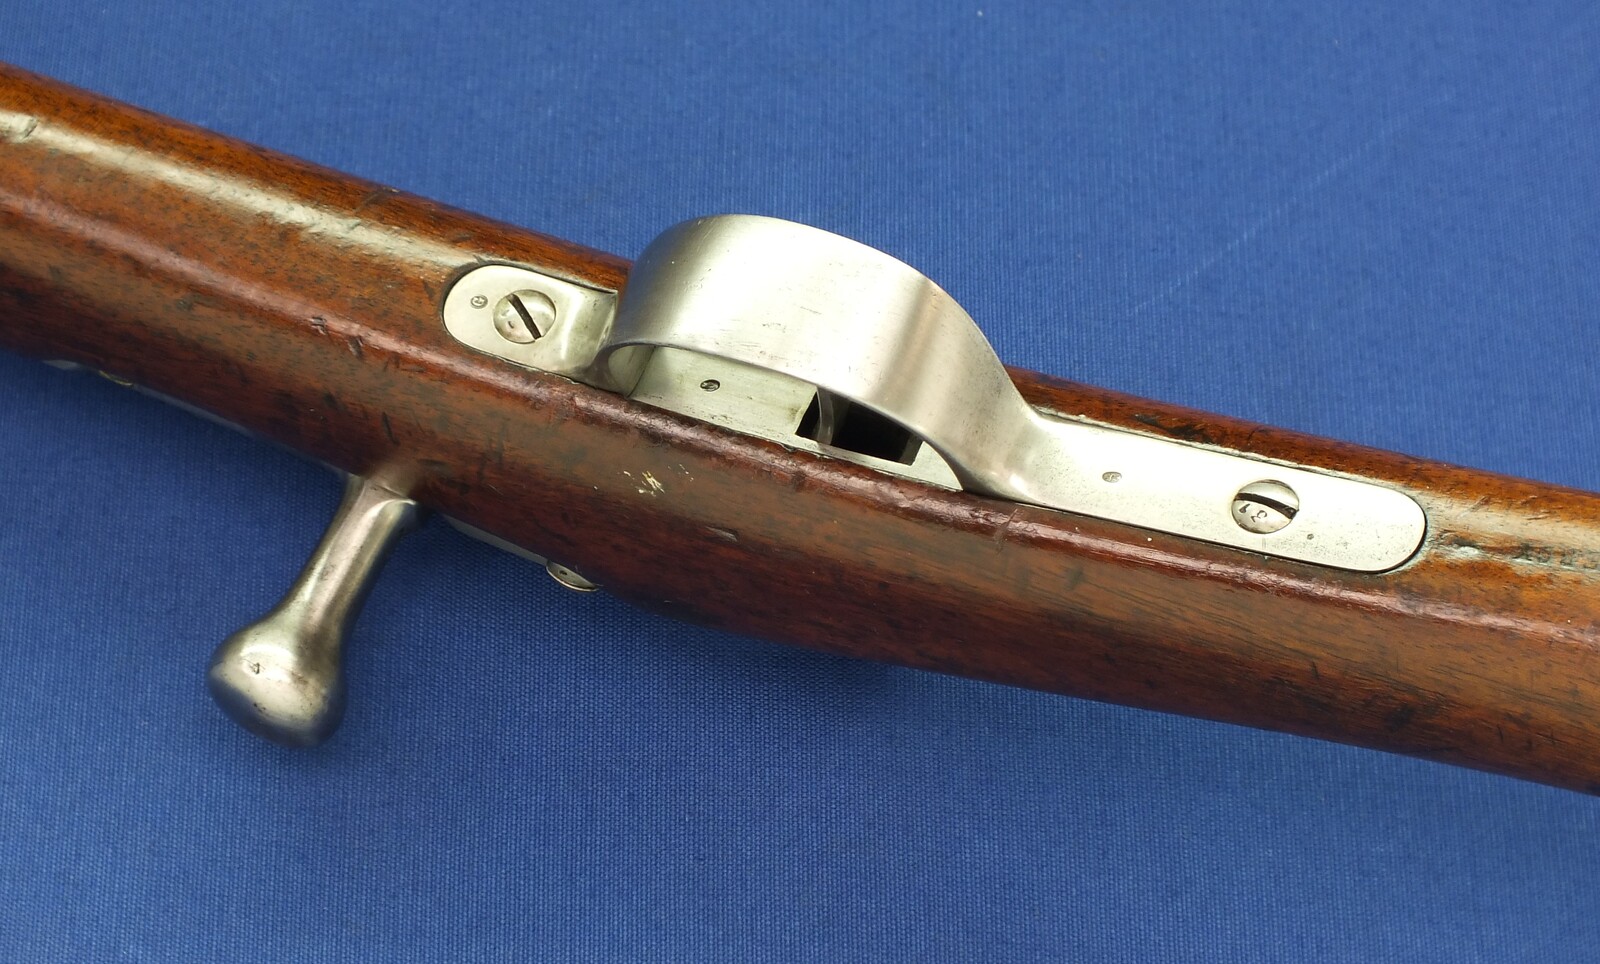 An antique French Chassepot Model 1866 Needle Fire Infantry Rifle. Signed: Manufacture Imperiale St. Etienne Mle 1866. Caliber 11mm, length 131 cm. In very good condition.